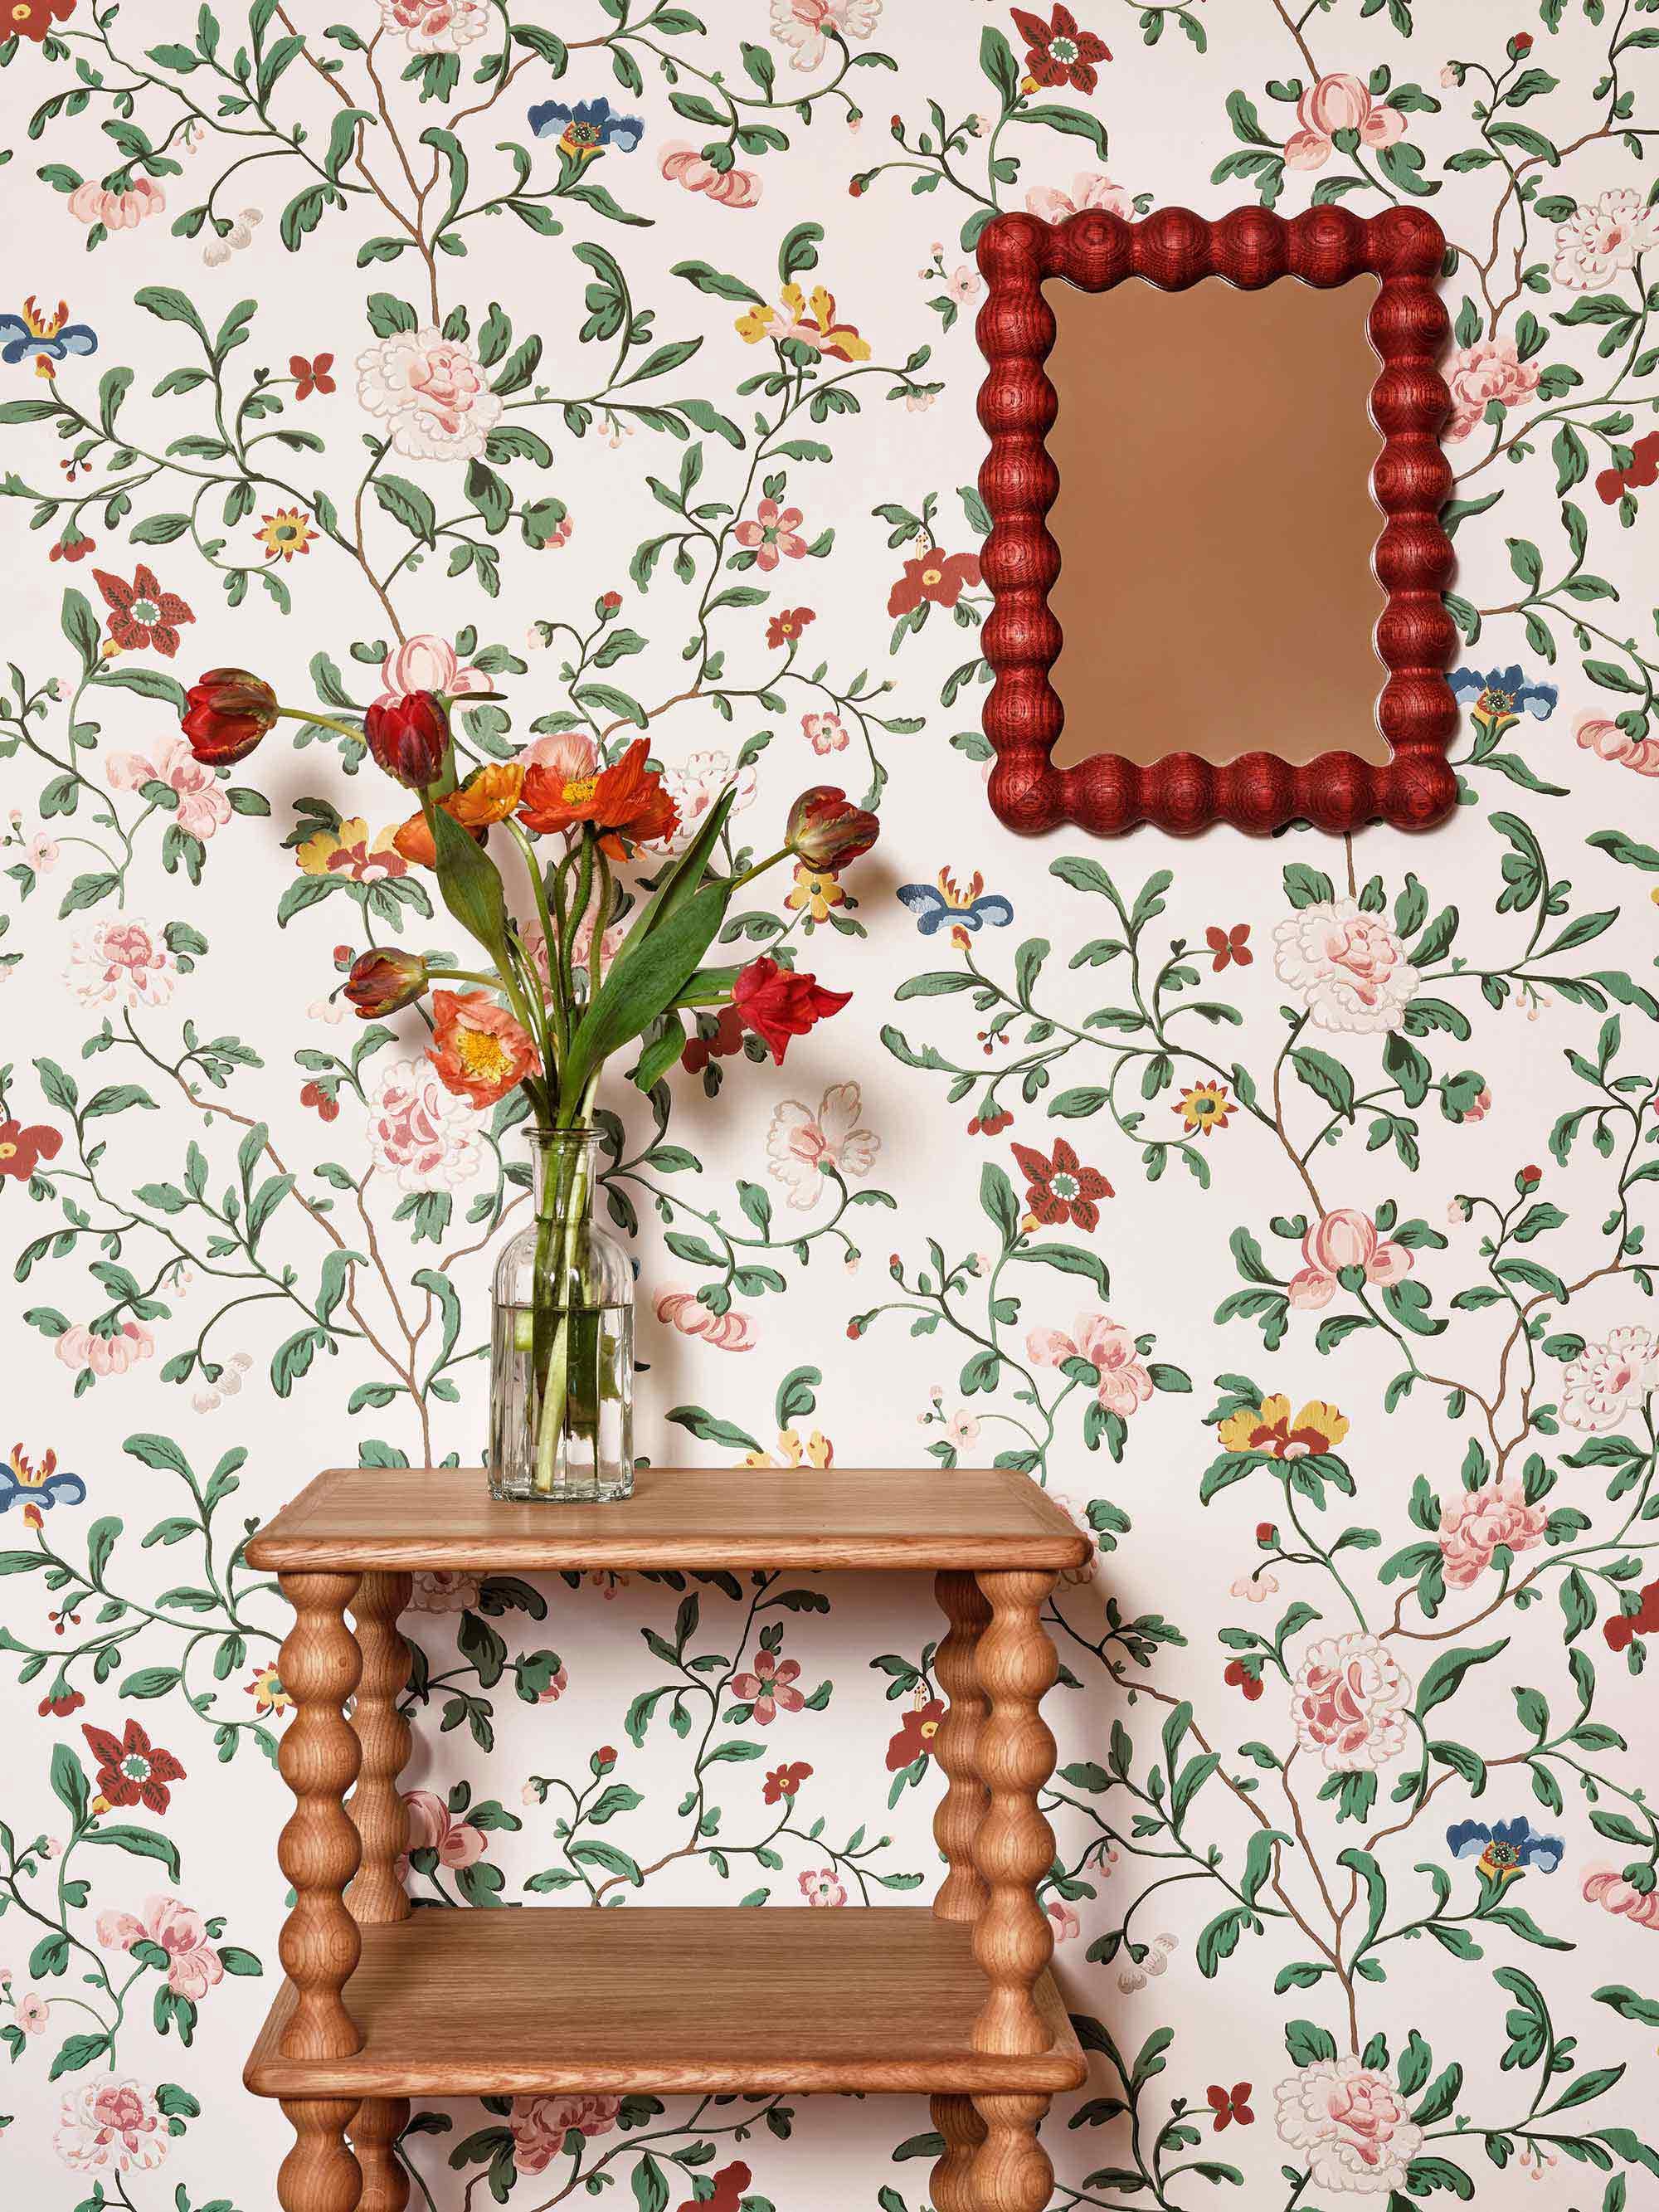  Wallpaper by  Tess Newall   Bobbin table by  Alfred Newall  